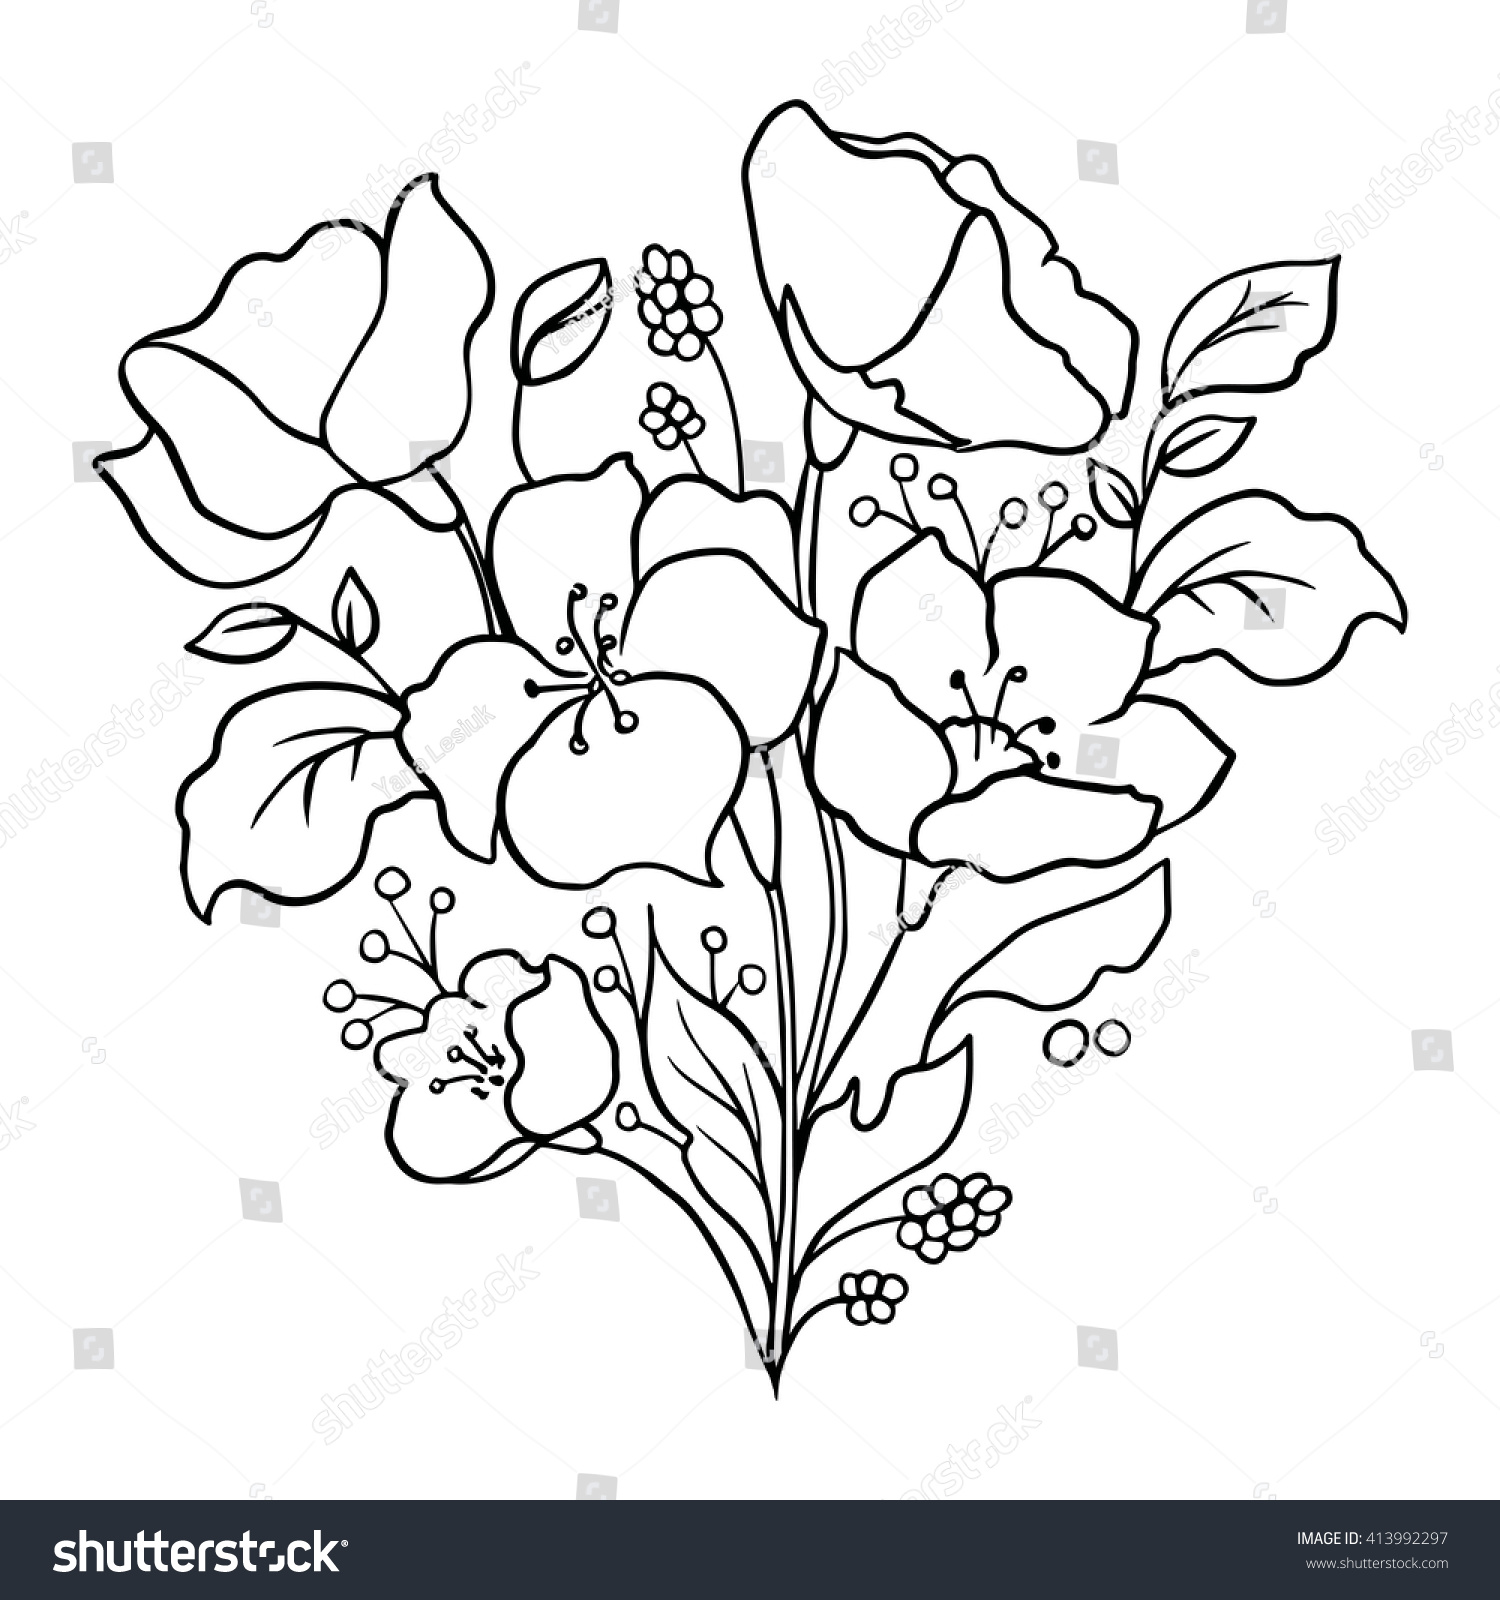 Floral Outline Silhouette Flowers Contour Drawing Stock Vector